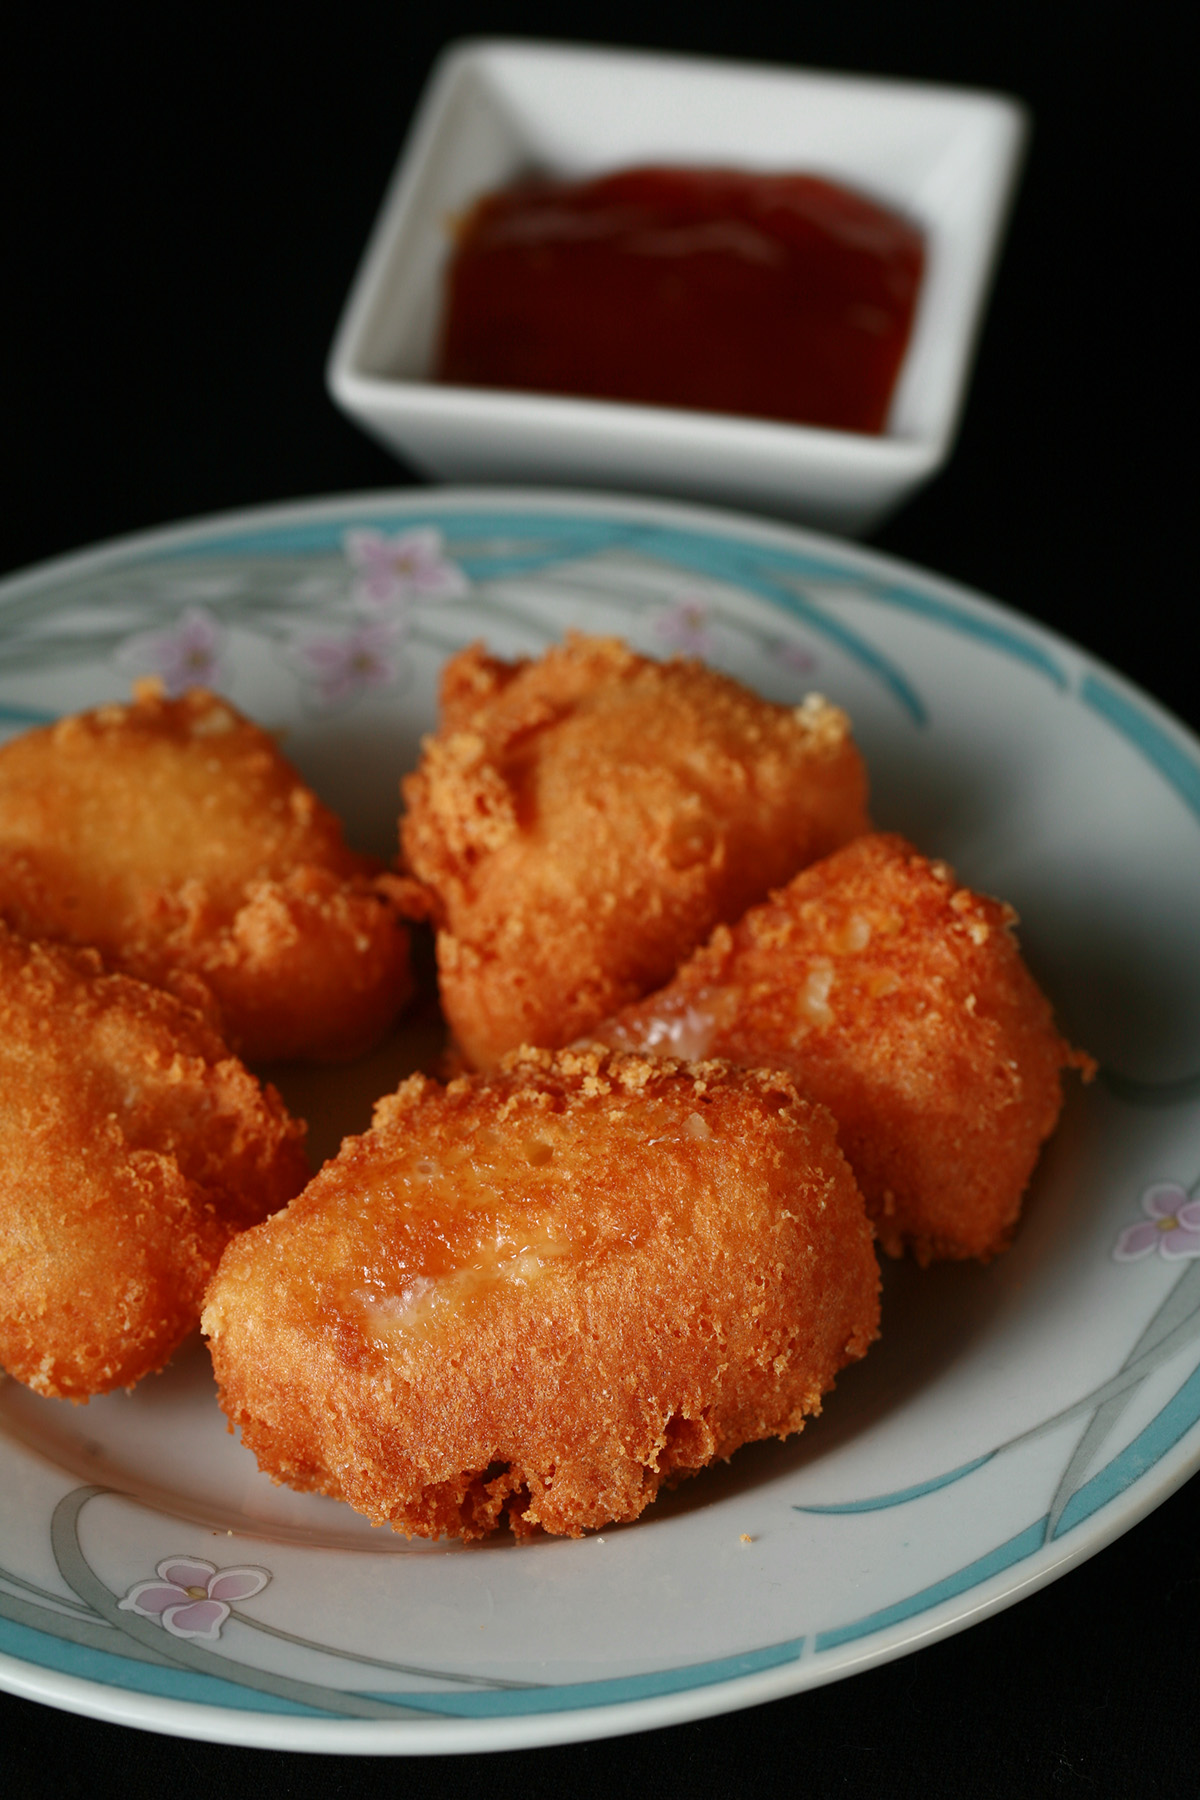 Several small wedges of gluten-free deep fried brie. There is a small bowl of apricot preserves next to the plate.